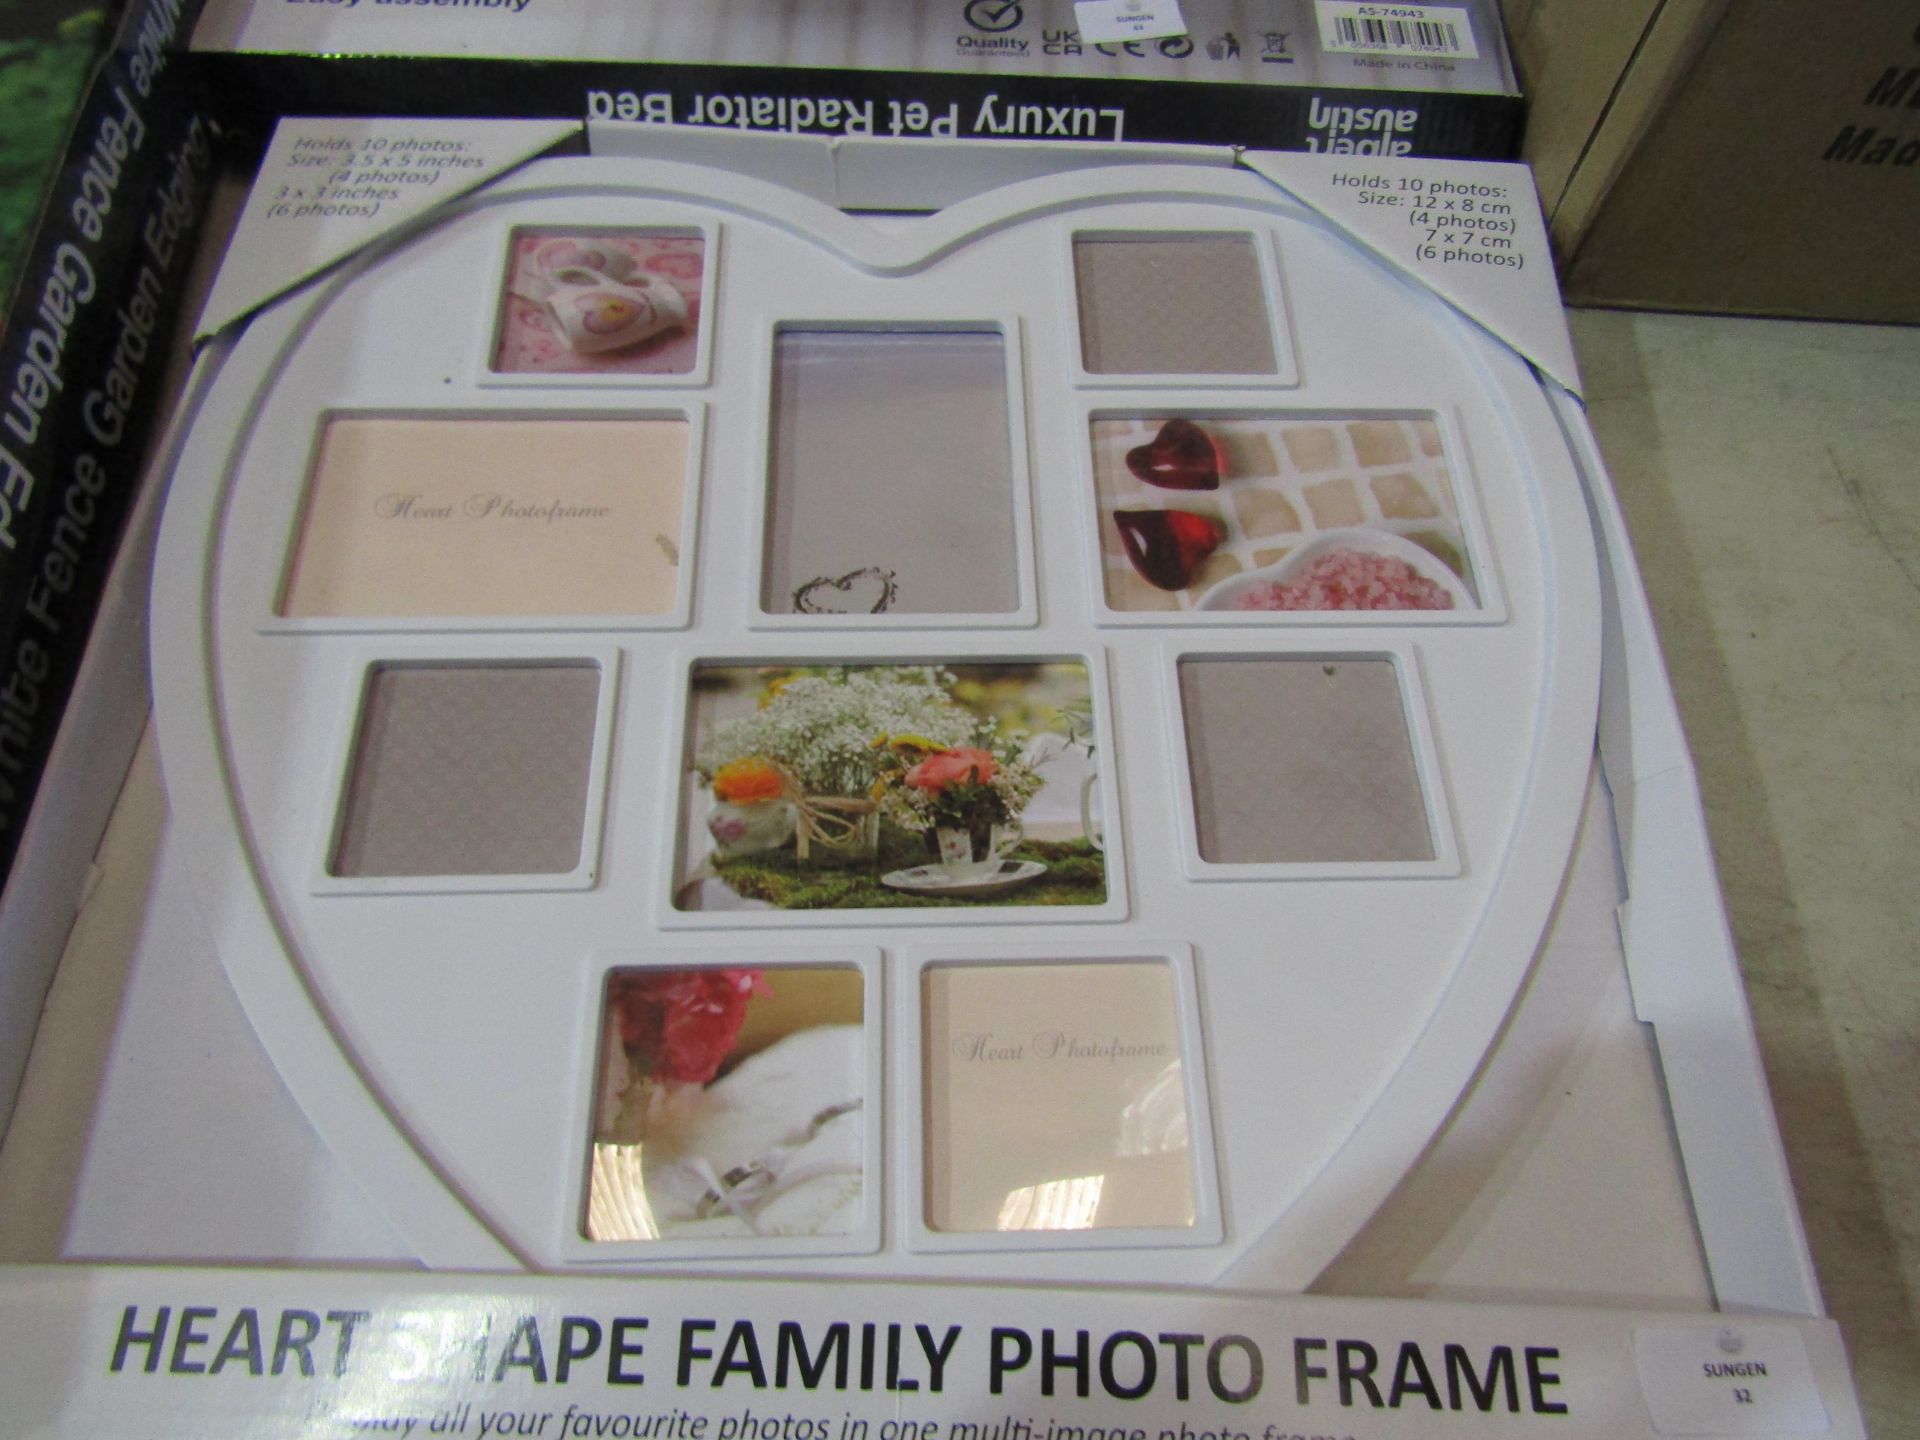 Heart Shape Family Photo Frame, White - Good Condition & Boxed - Please See Picture For Further